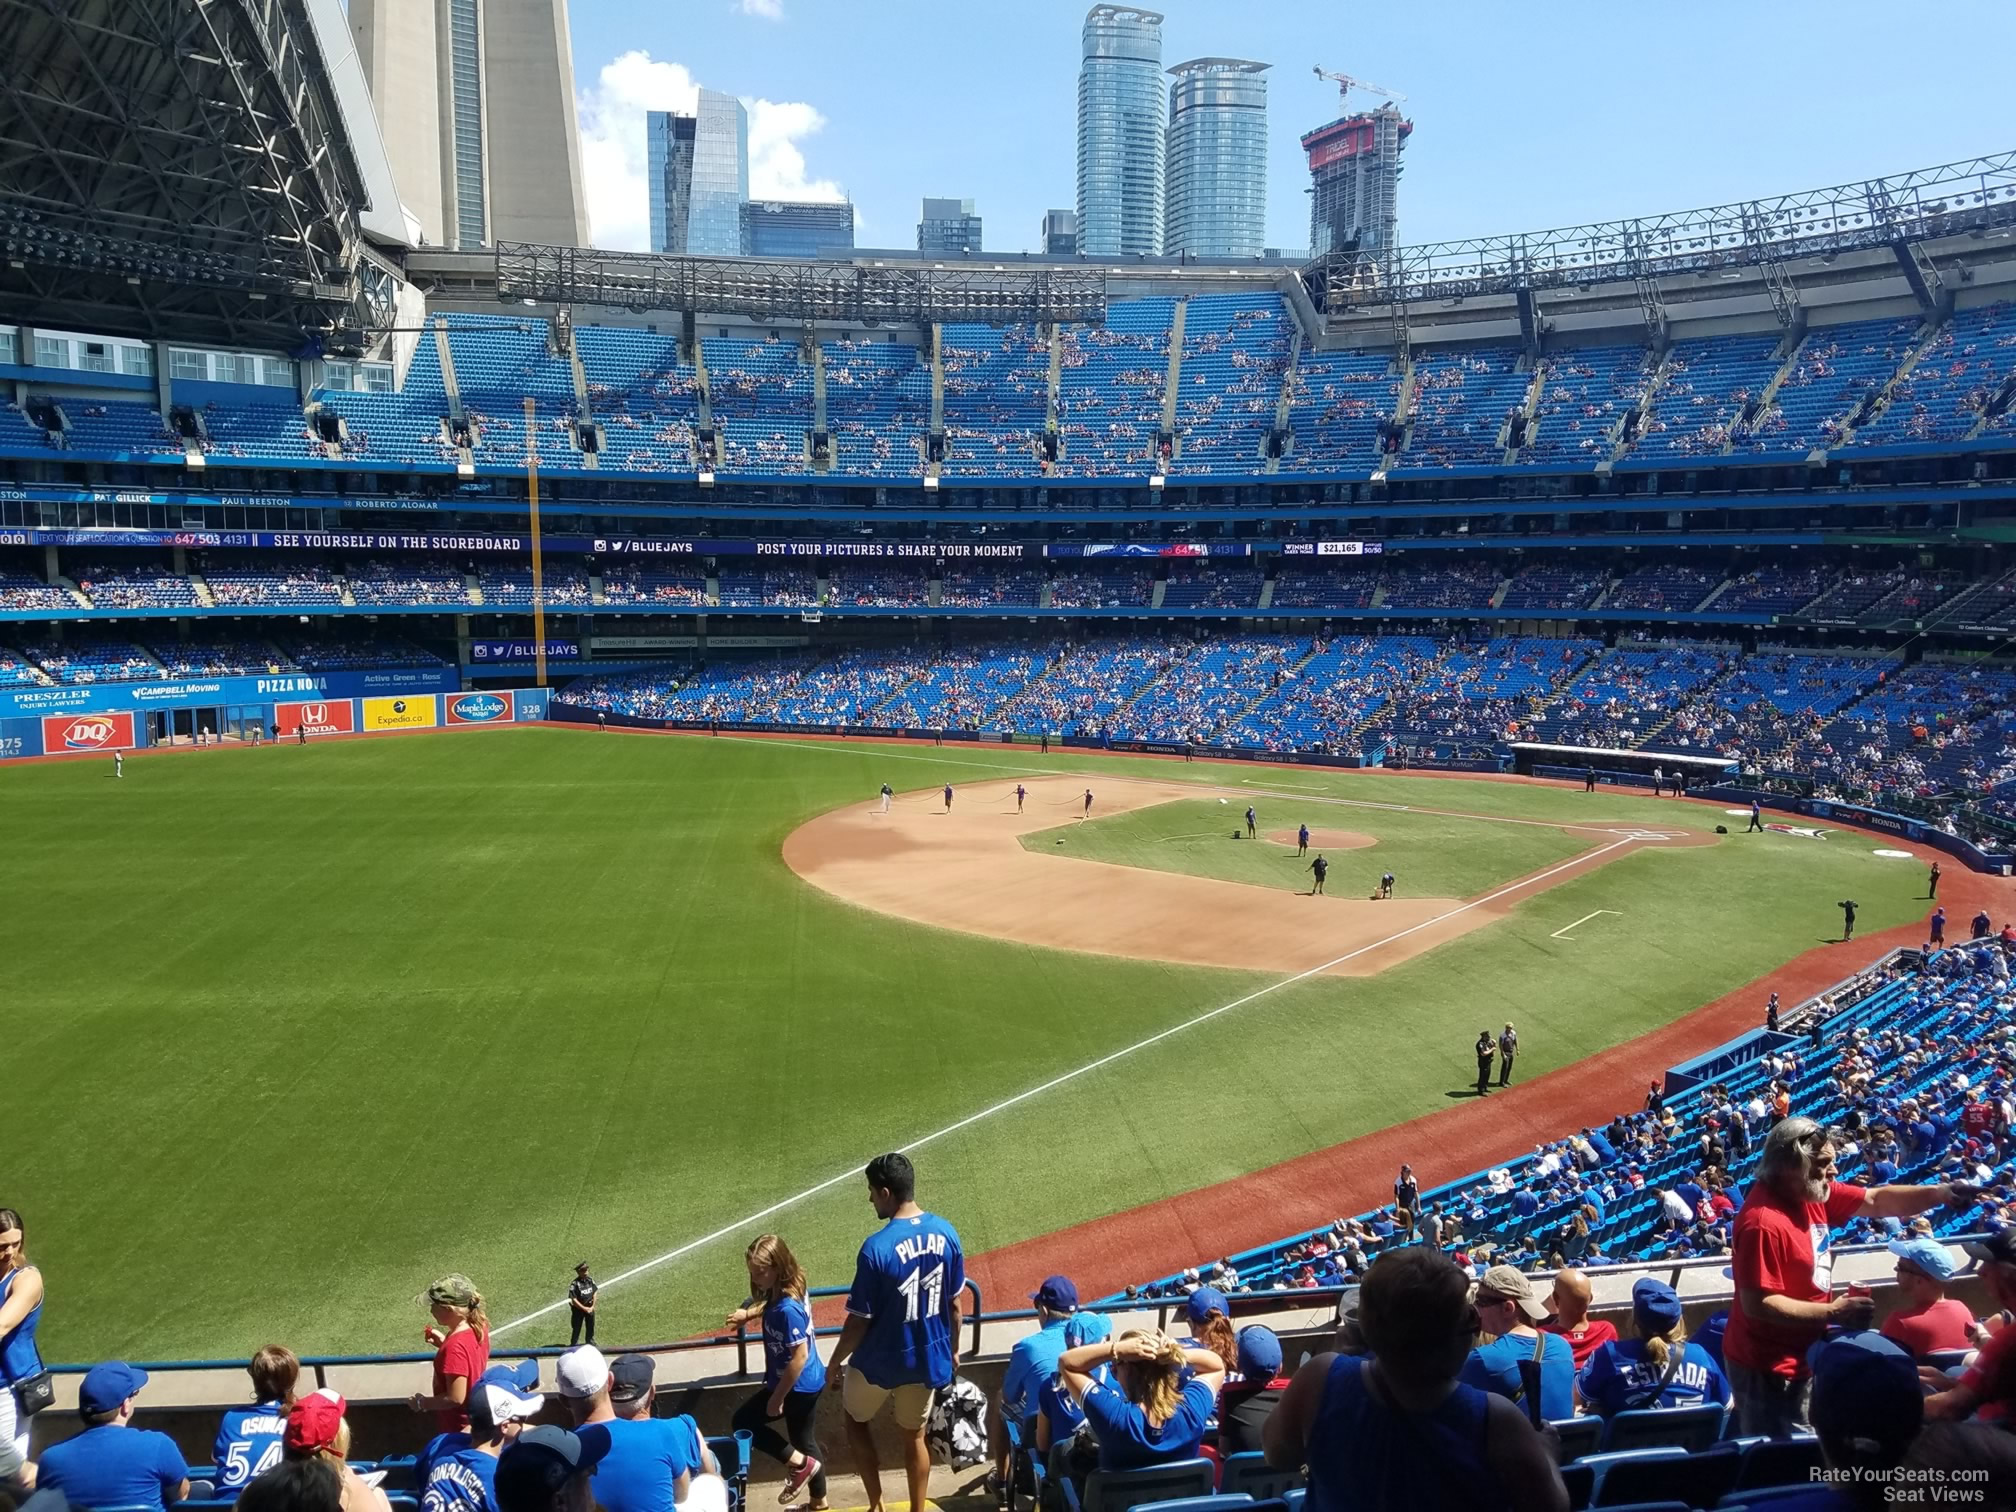 SJ Obstructed Views - Toronto Blue Jays - Rogers Centre ⚾ (Ep.11) 